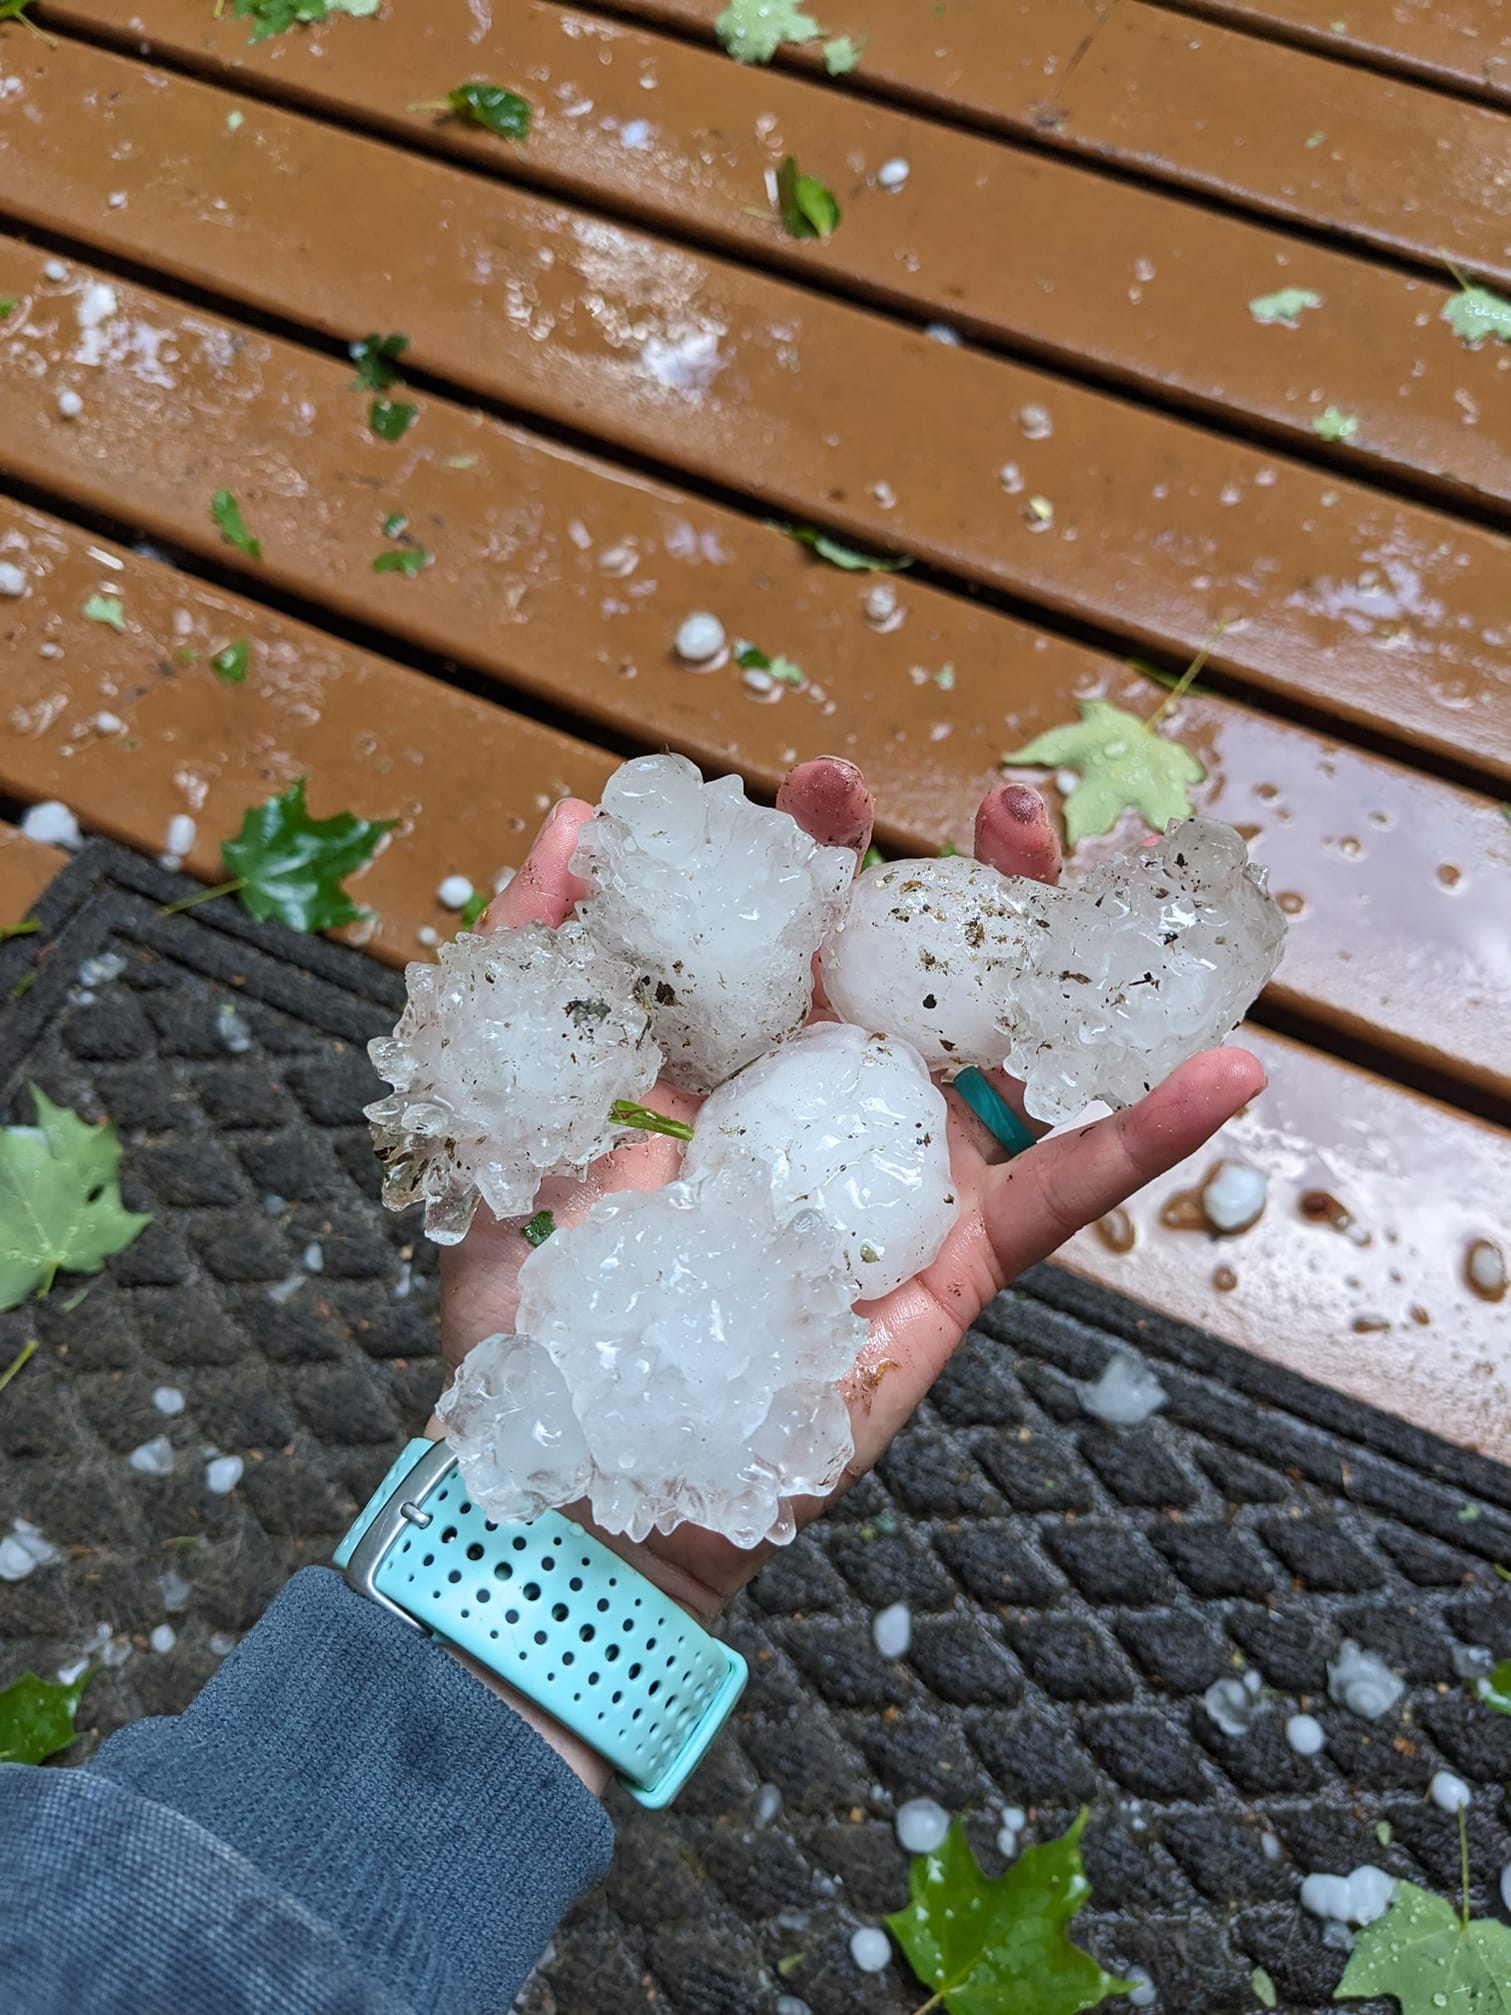 Alanna Sine Hail east of Bowstring and Marcell1